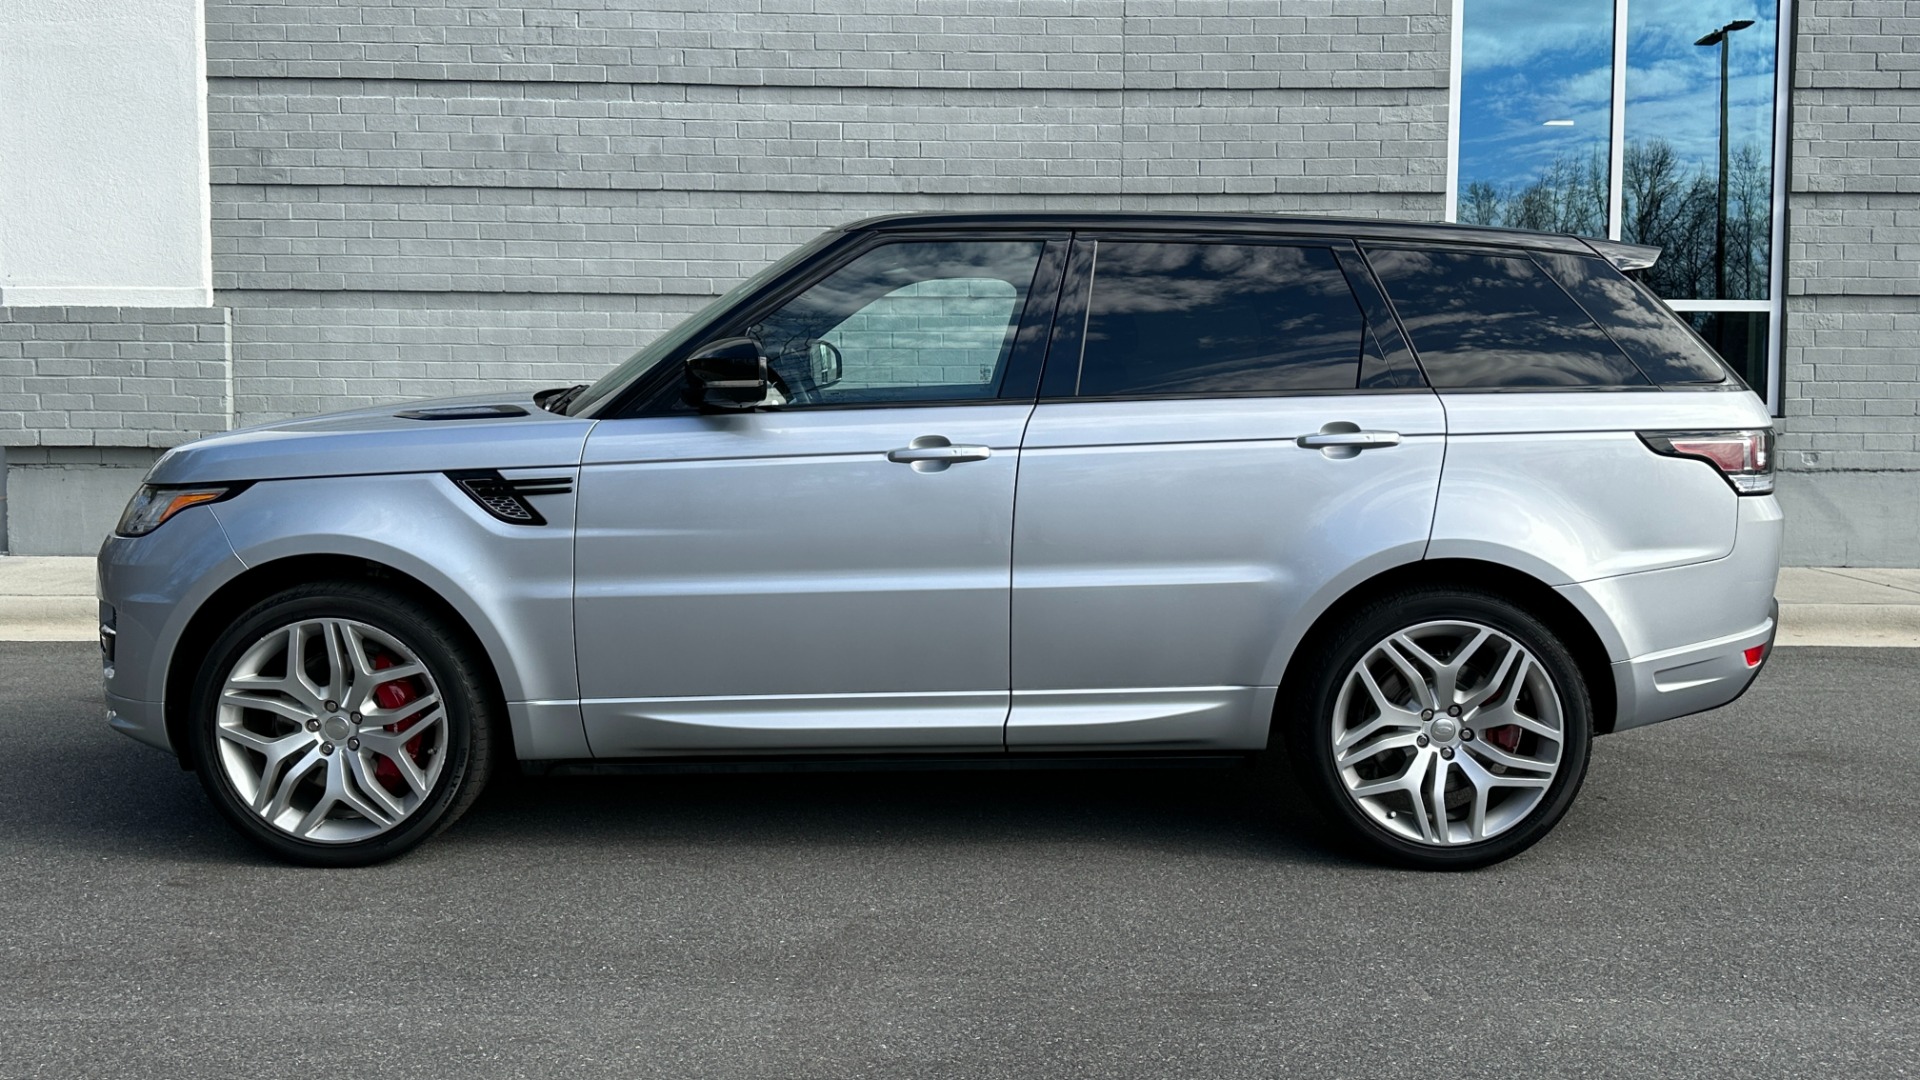 Used 2014 Land Rover Range Rover Sport Autobiography for sale $36,999 at Formula Imports in Charlotte NC 28227 3